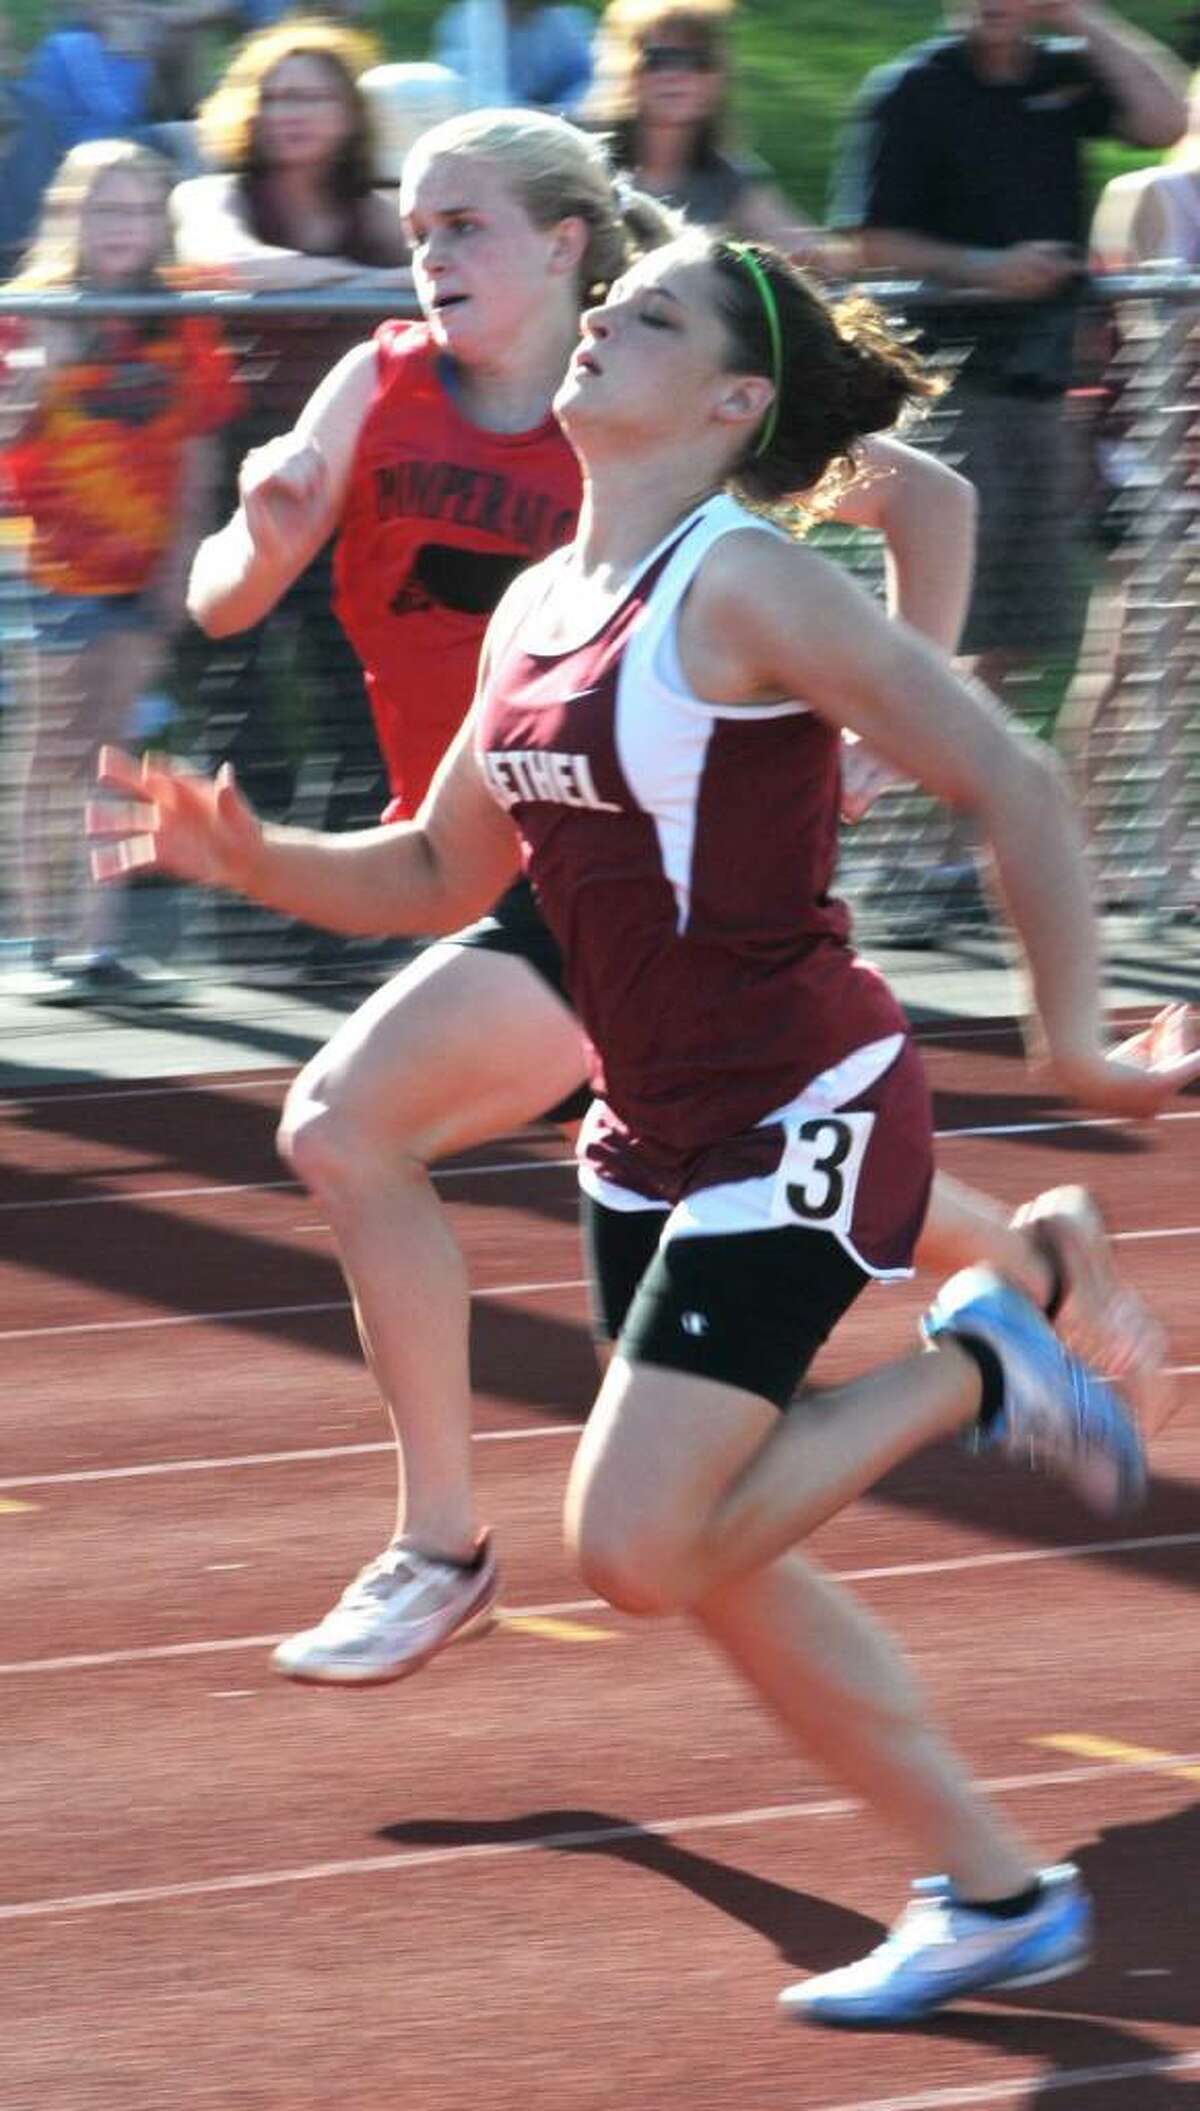 Lizzie Morton, of Bethel High School, runs the 100 meter dash, at the South West Conference girls Track and Field Championships, held at Pomperaug High School, on Monday, May 24, 2010.